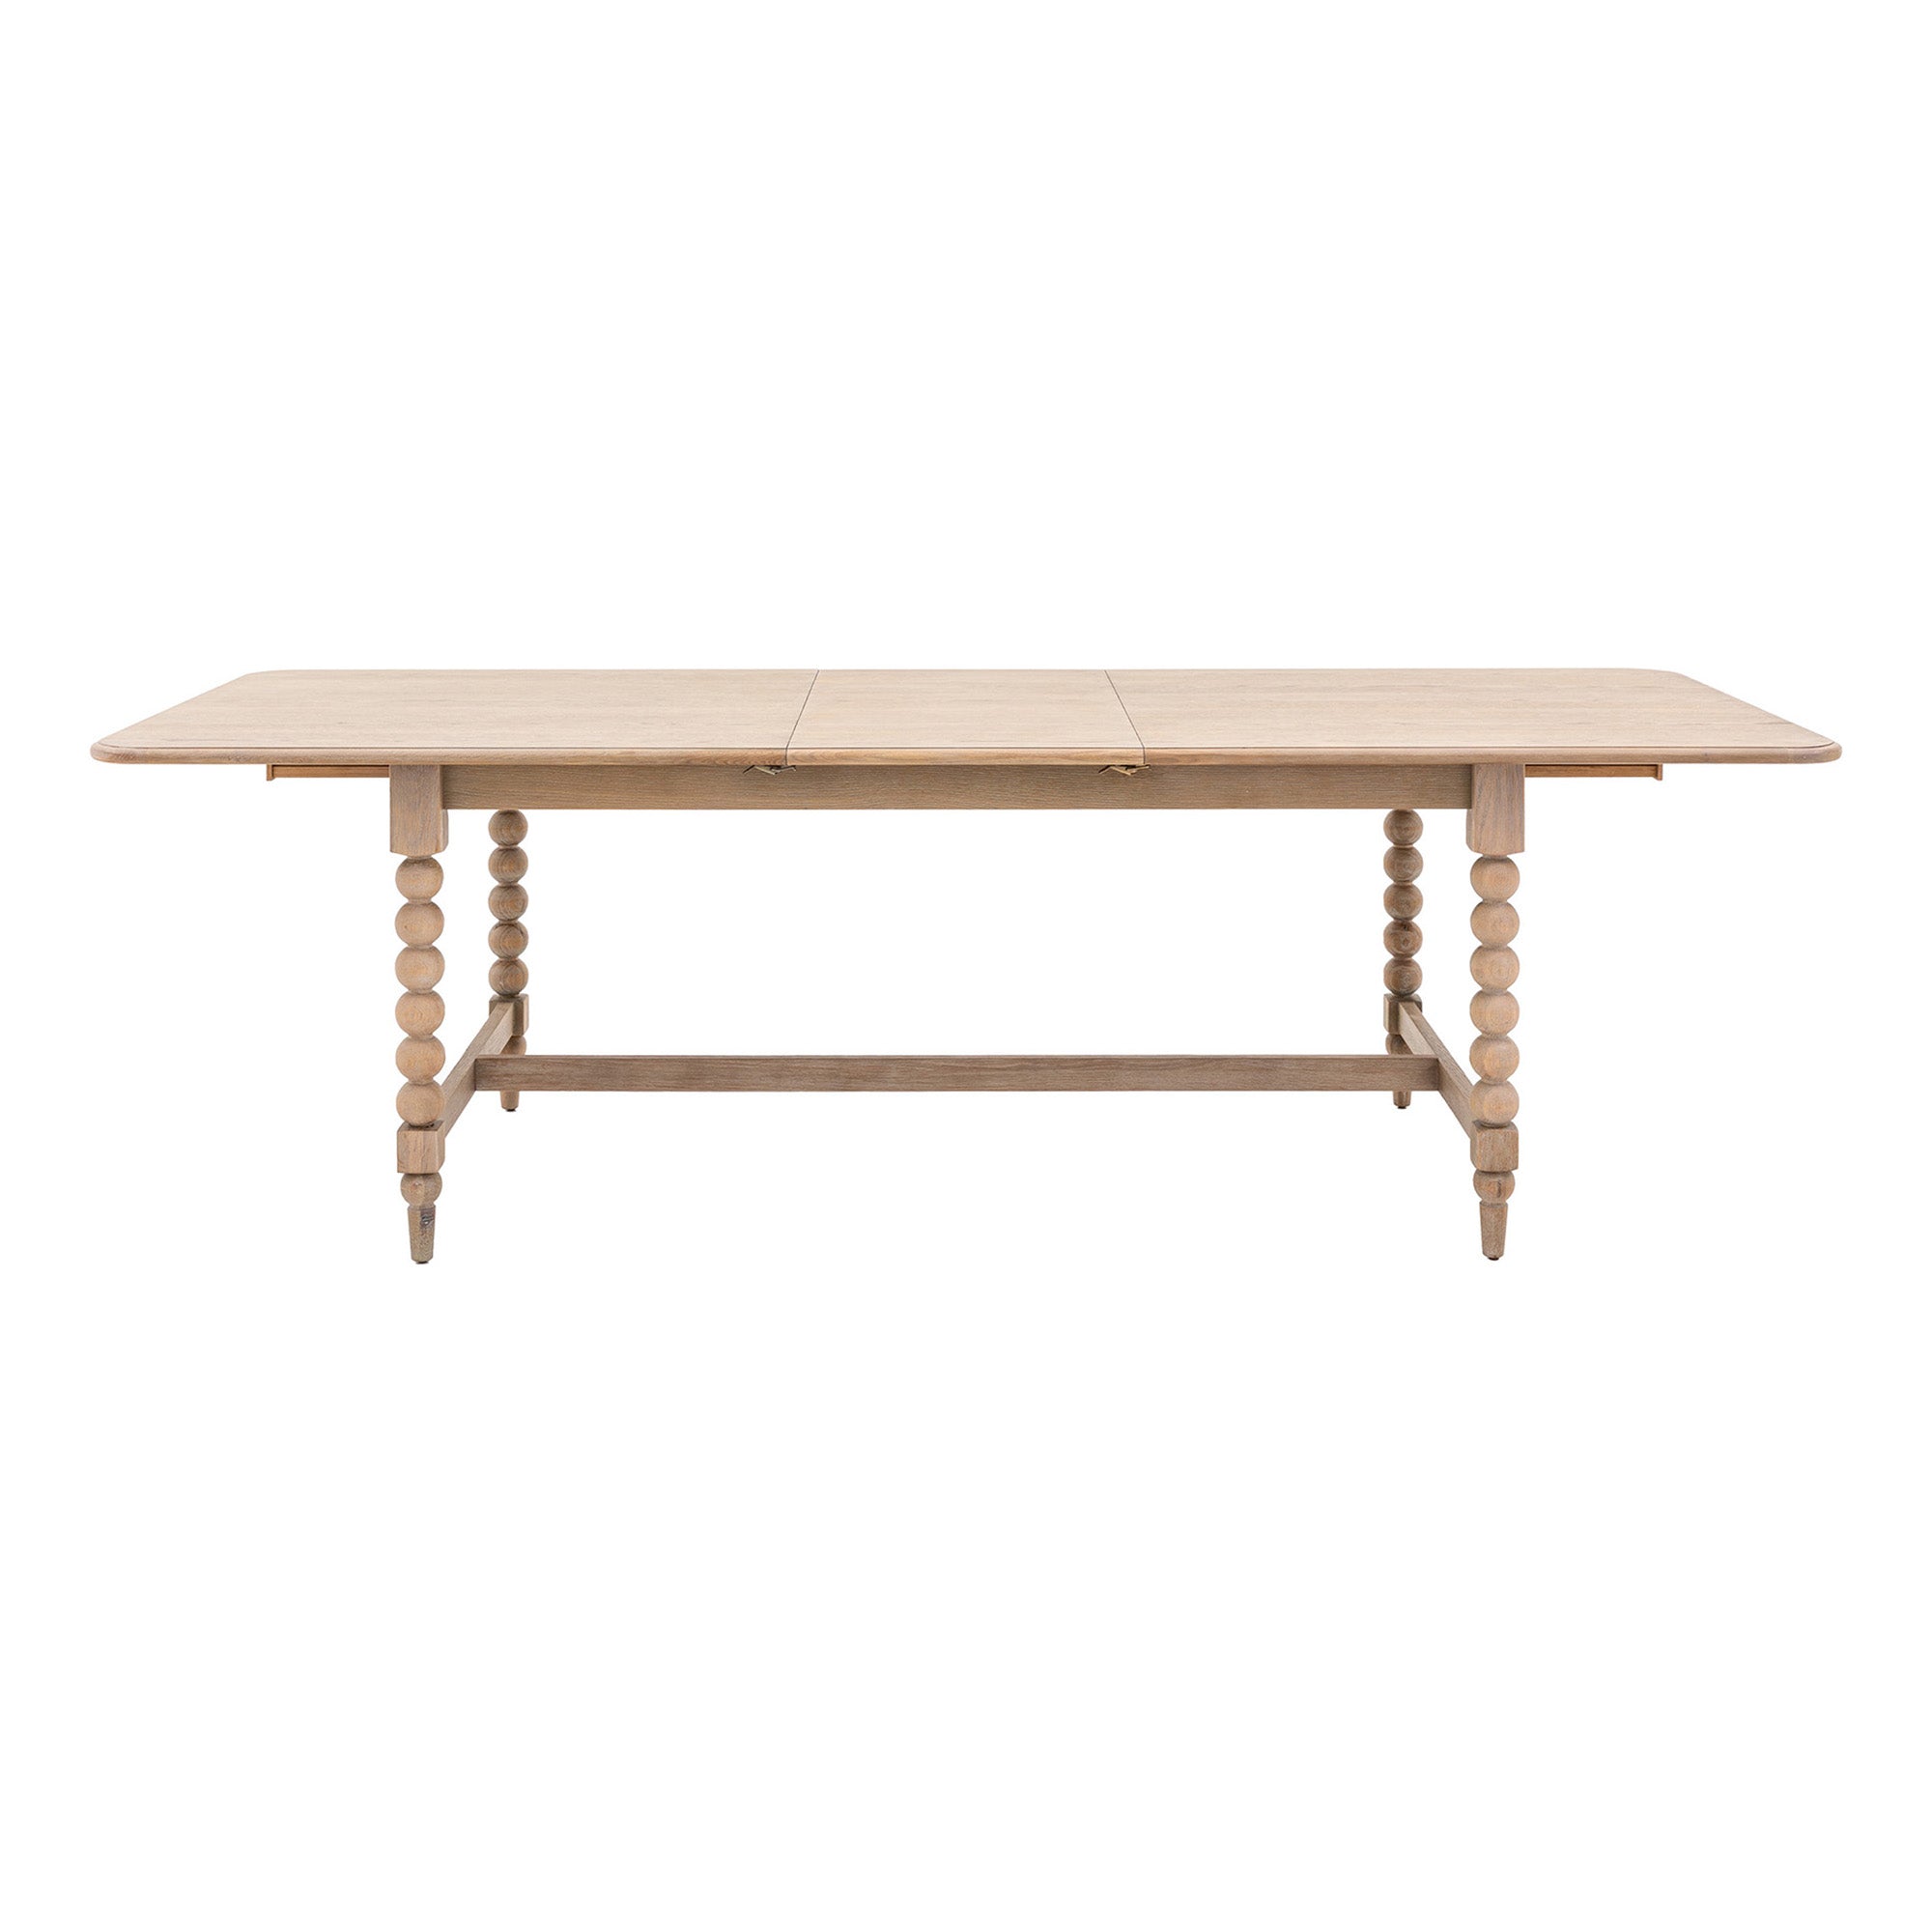 The Bobbin Extendable Dining Table